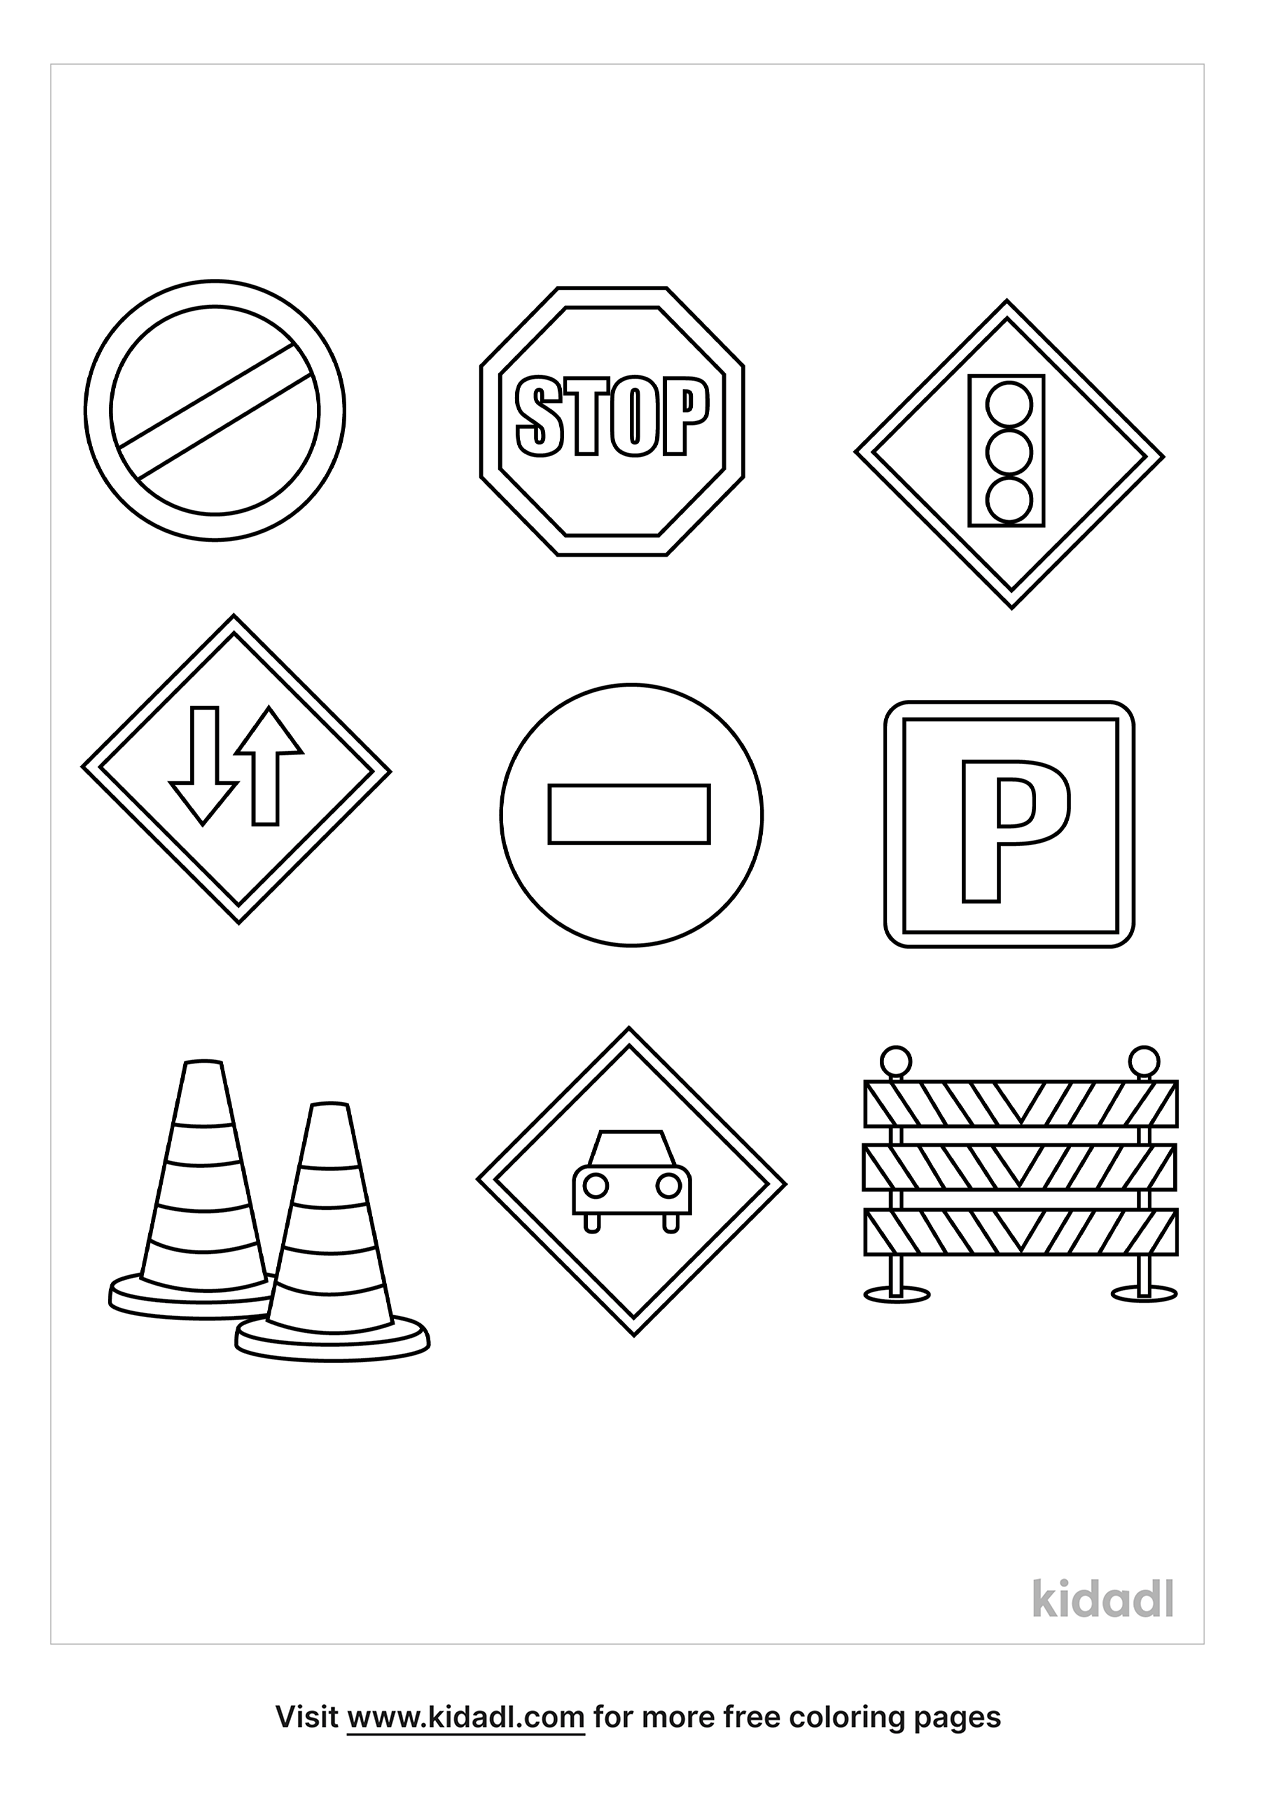 Traffic Signs For Kids Coloring Pages | Free Outdoor Coloring Pages | Kidadl